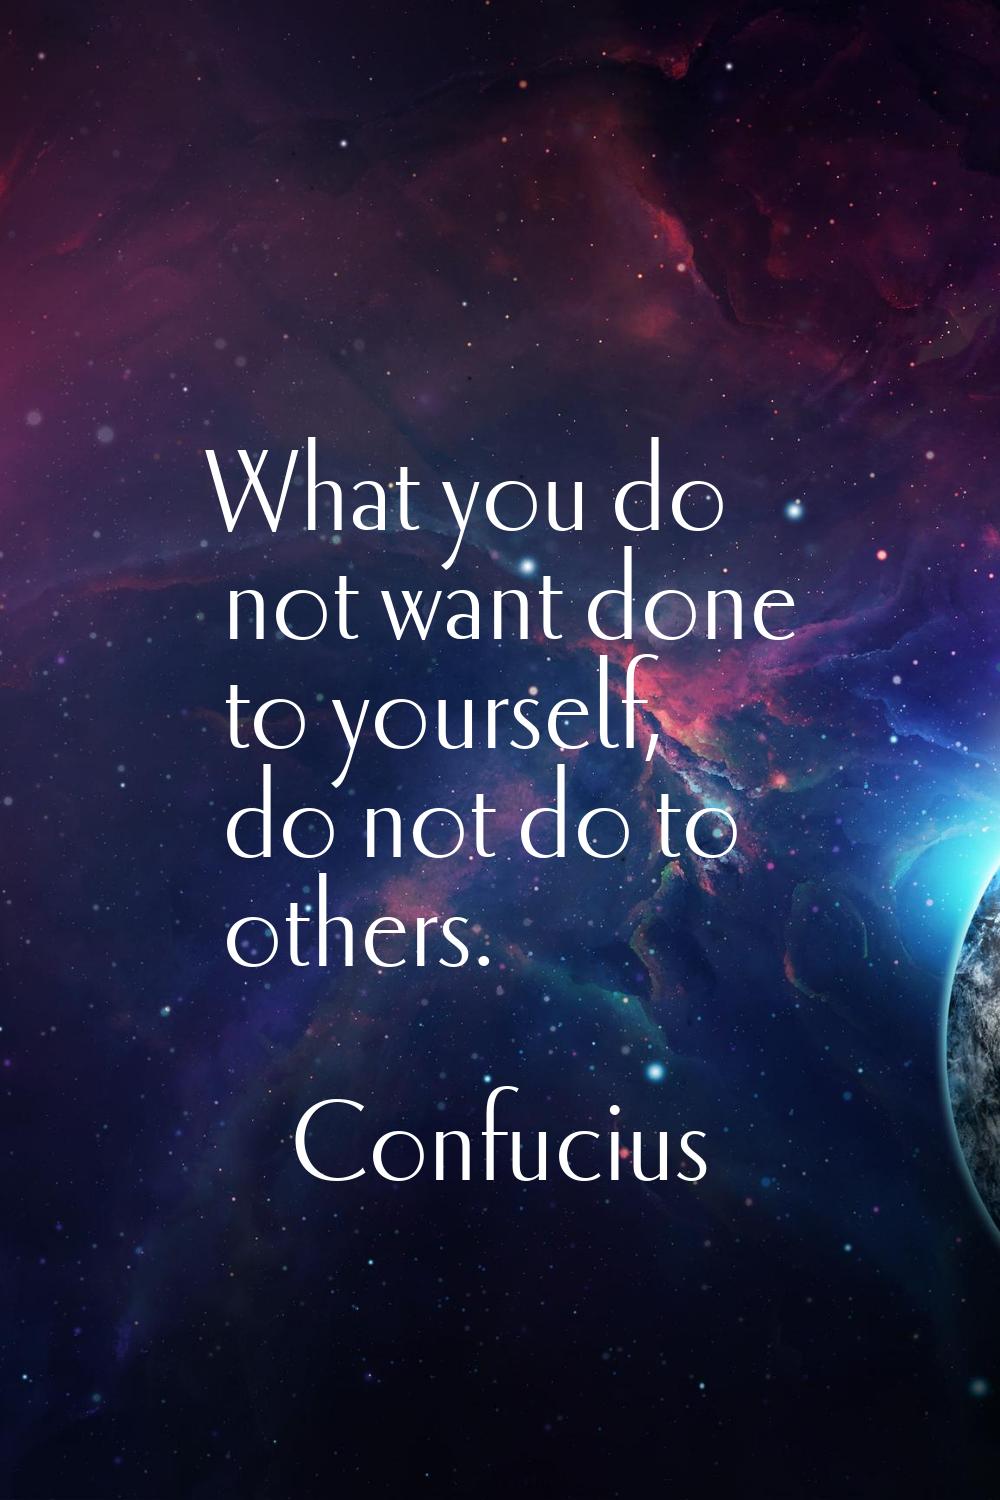 What you do not want done to yourself, do not do to others.